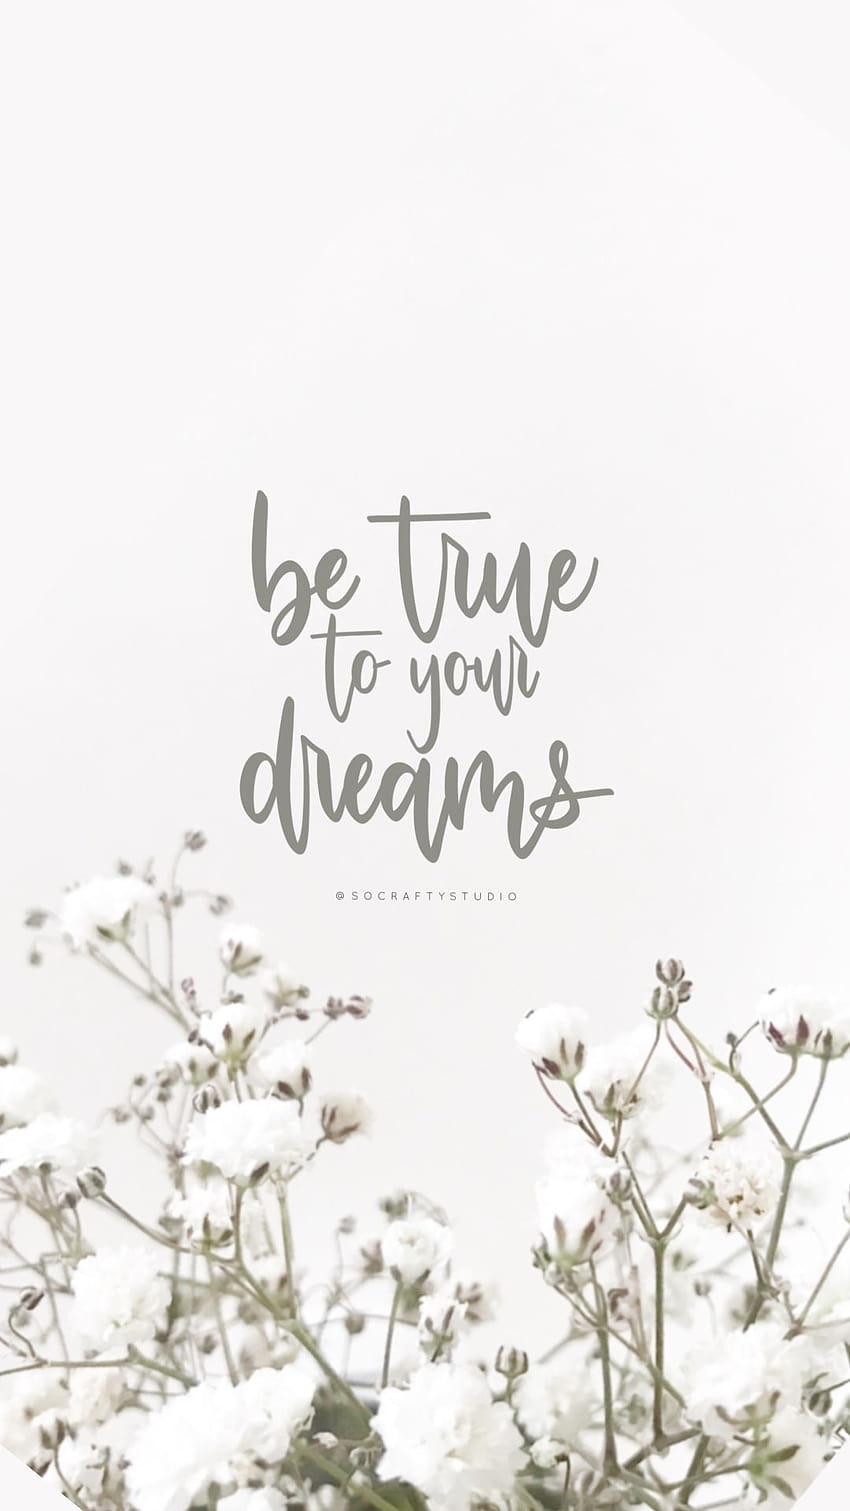 Be true to your dreams” phone, babys breath HD phone wallpaper